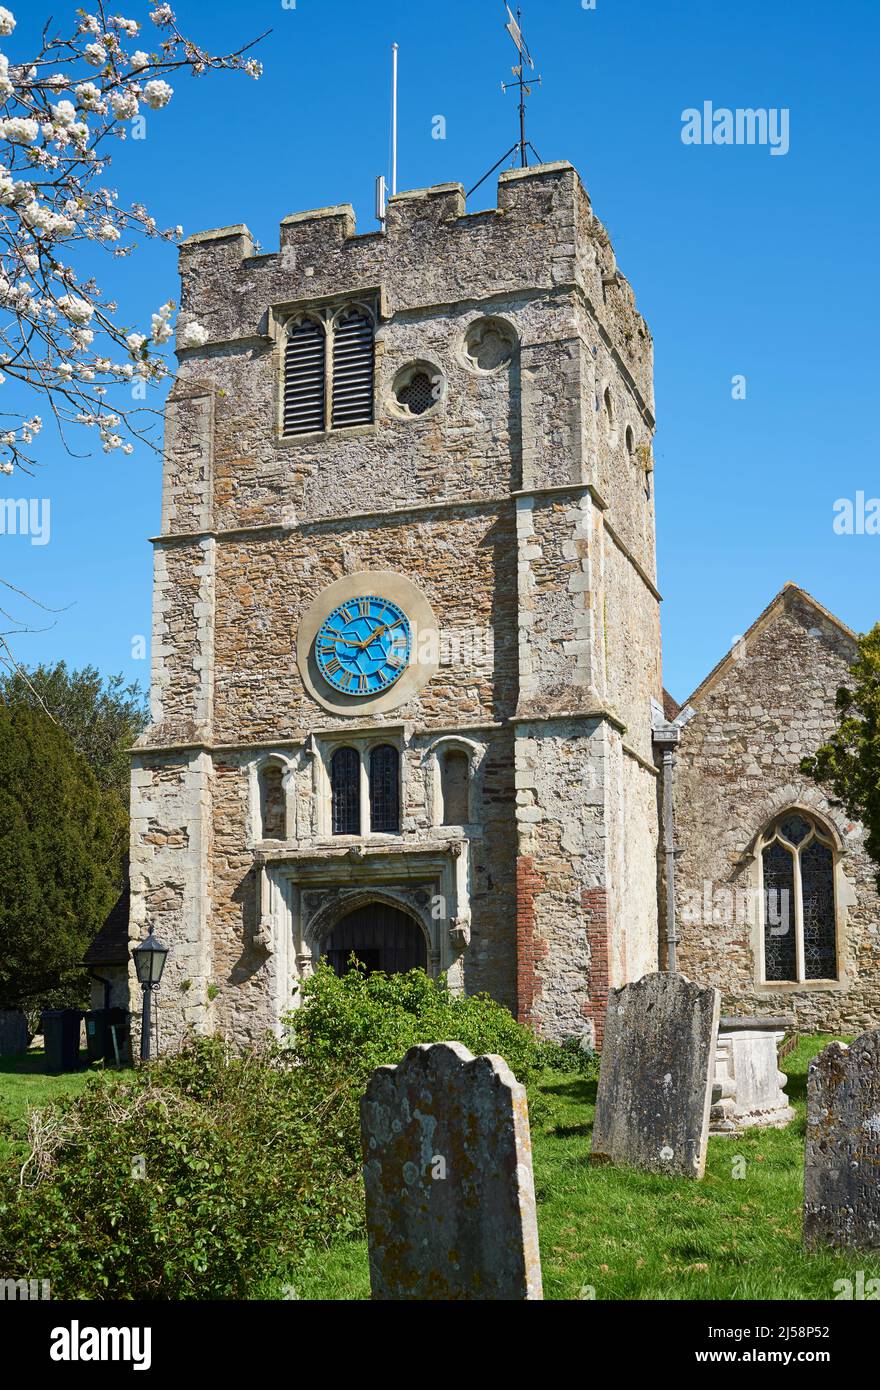 The medieval church tower of St Peter and St Paul at Appledore, Kent, South East England Stock Photo